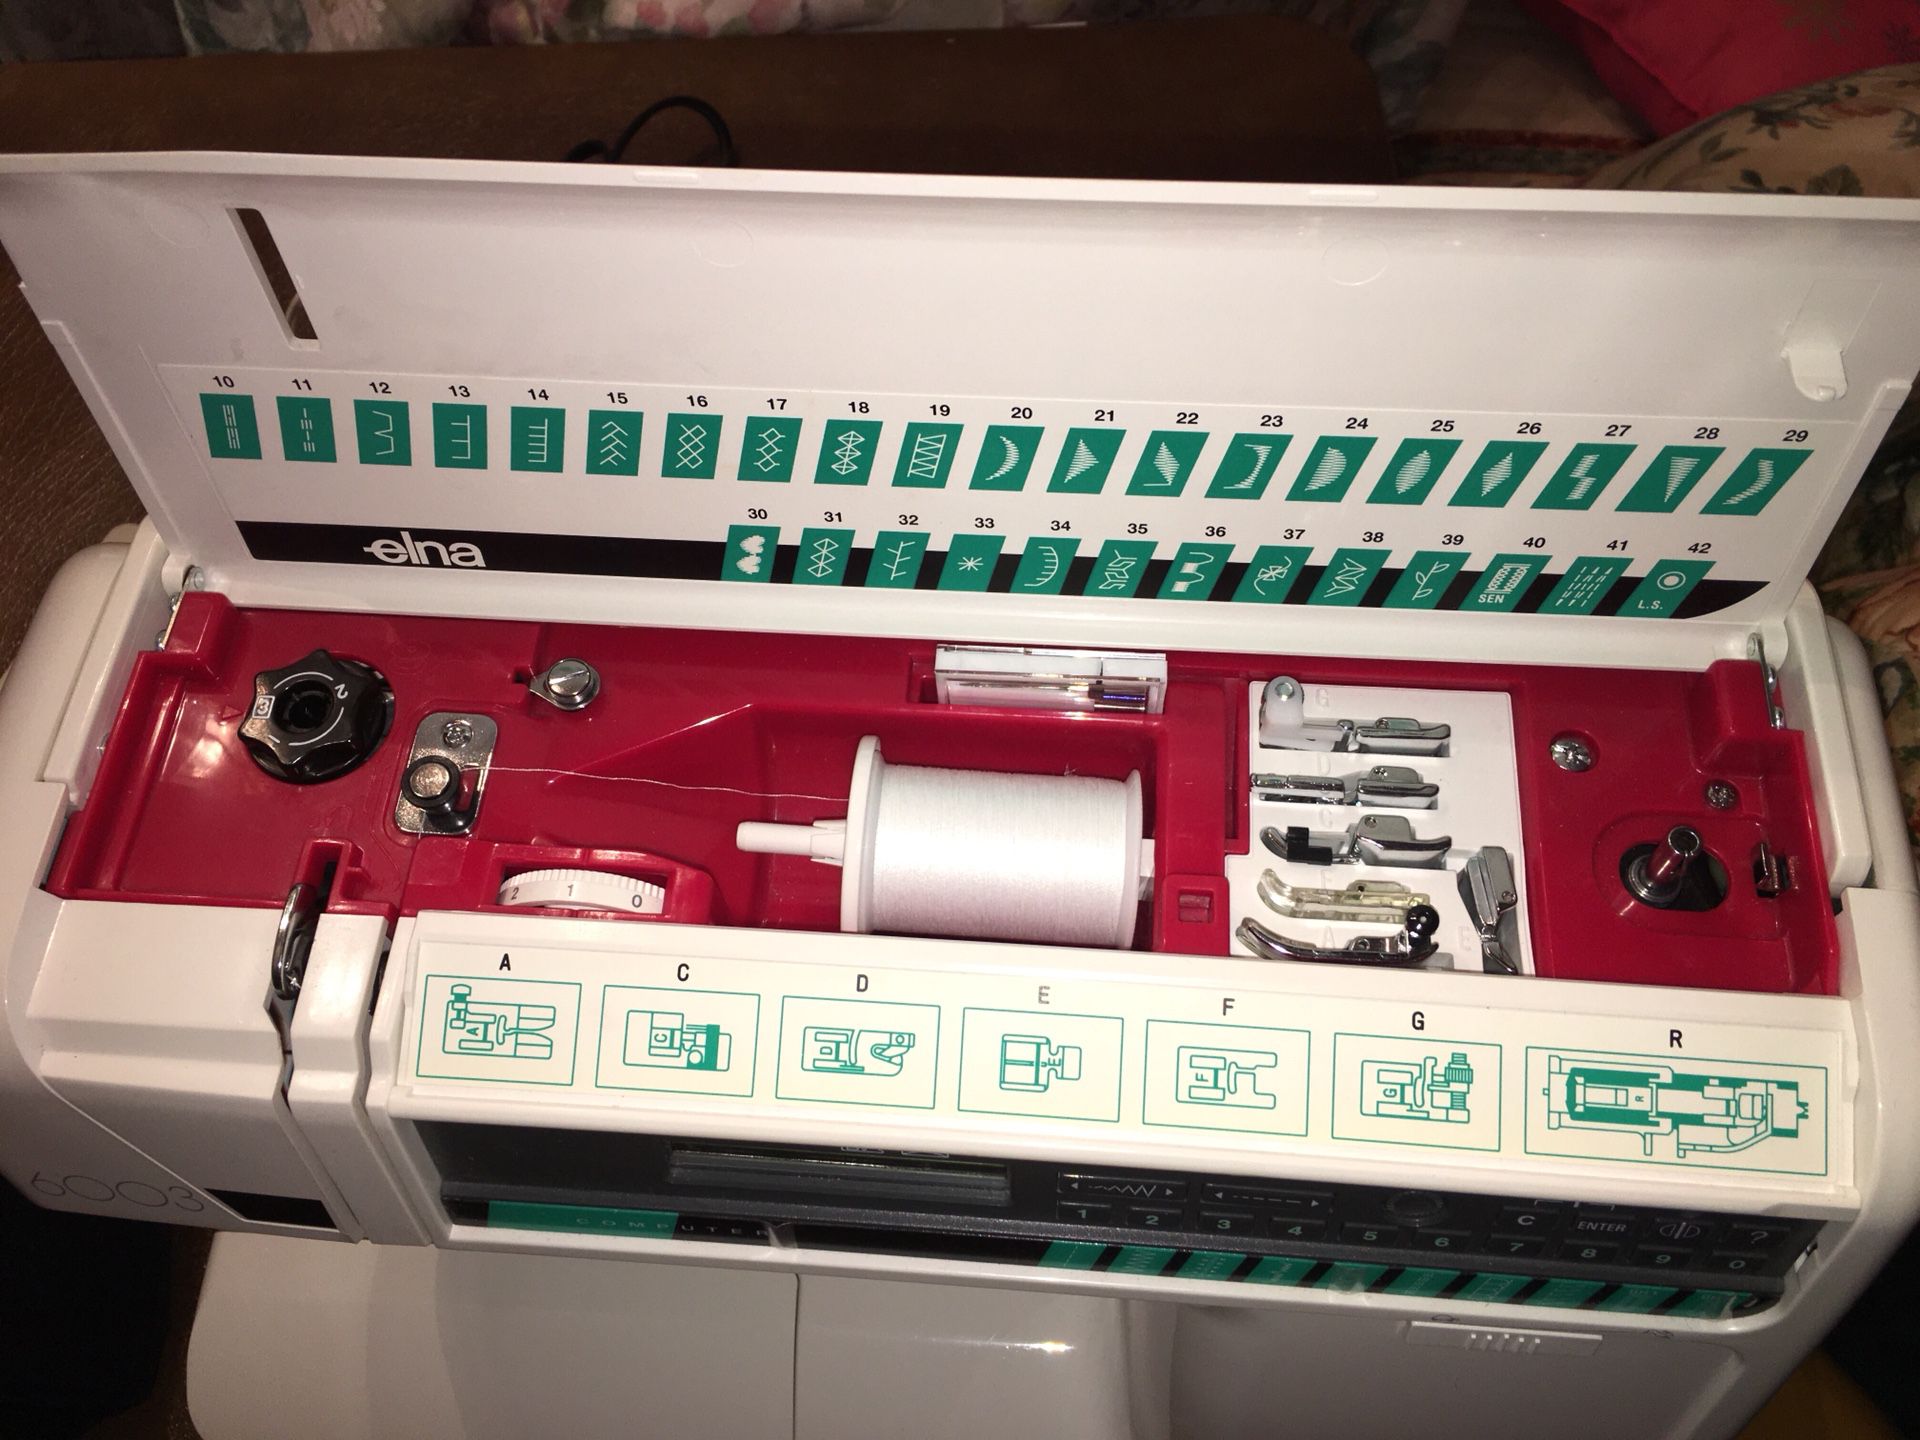 Elna 6003 Sewing Machinelike New For Sale In Richardson Tx Offerup